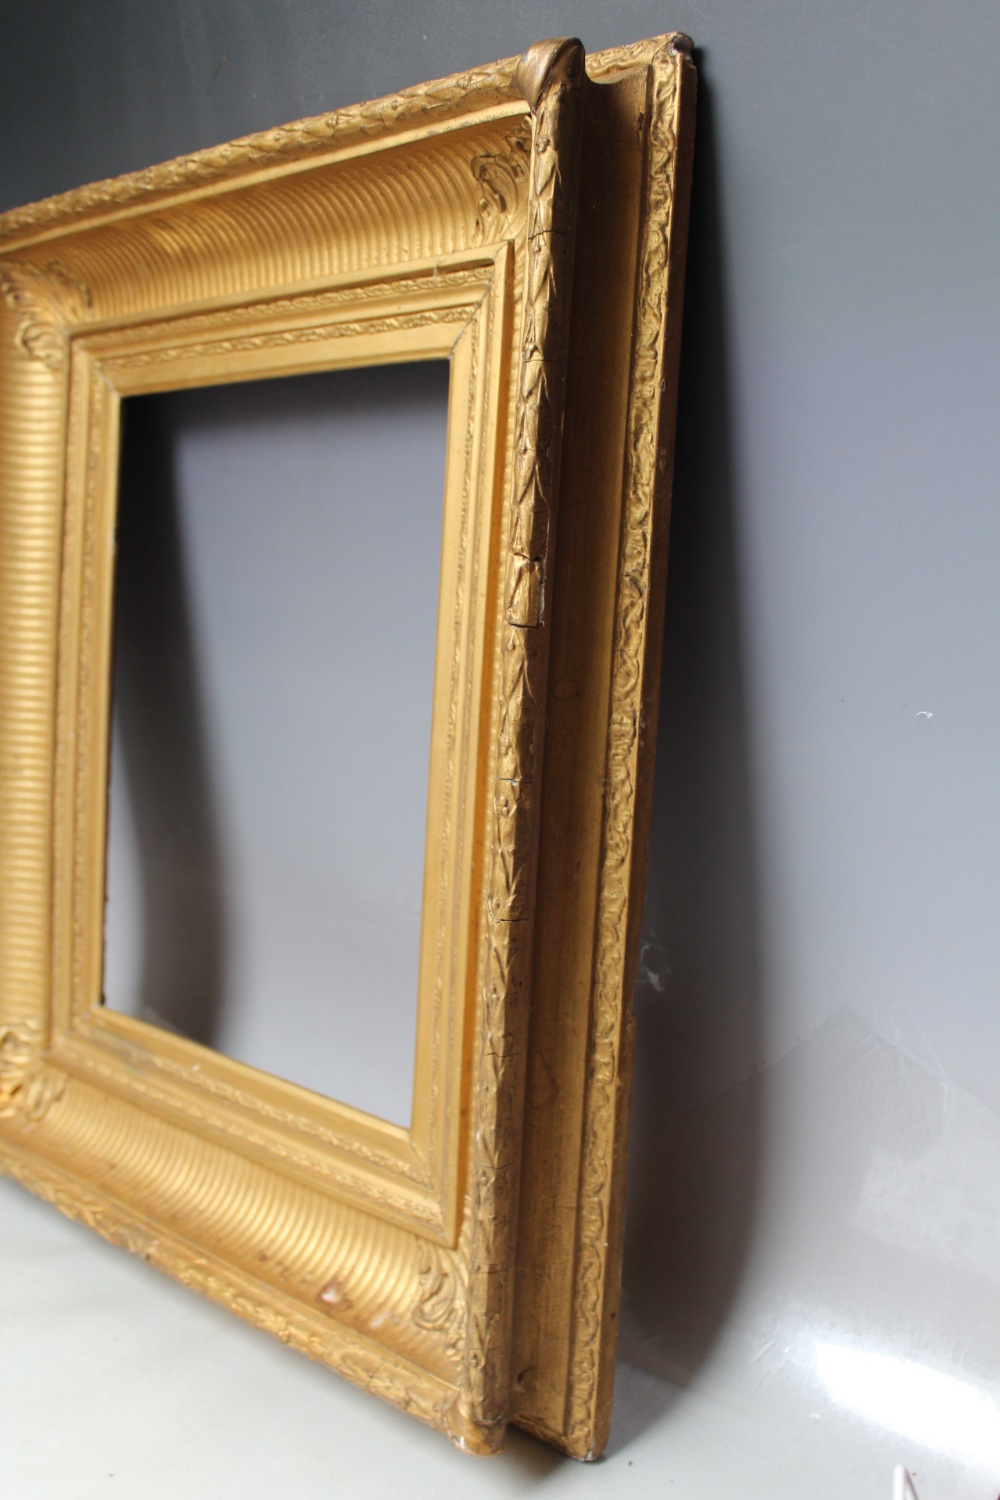 A 19TH CENTURY GOLD FRAME WITH ACANTHUS LEAF DESIGN TO OUTER EDGE, frame W 11 cm, rebate 37 x 28 cm - Image 6 of 7